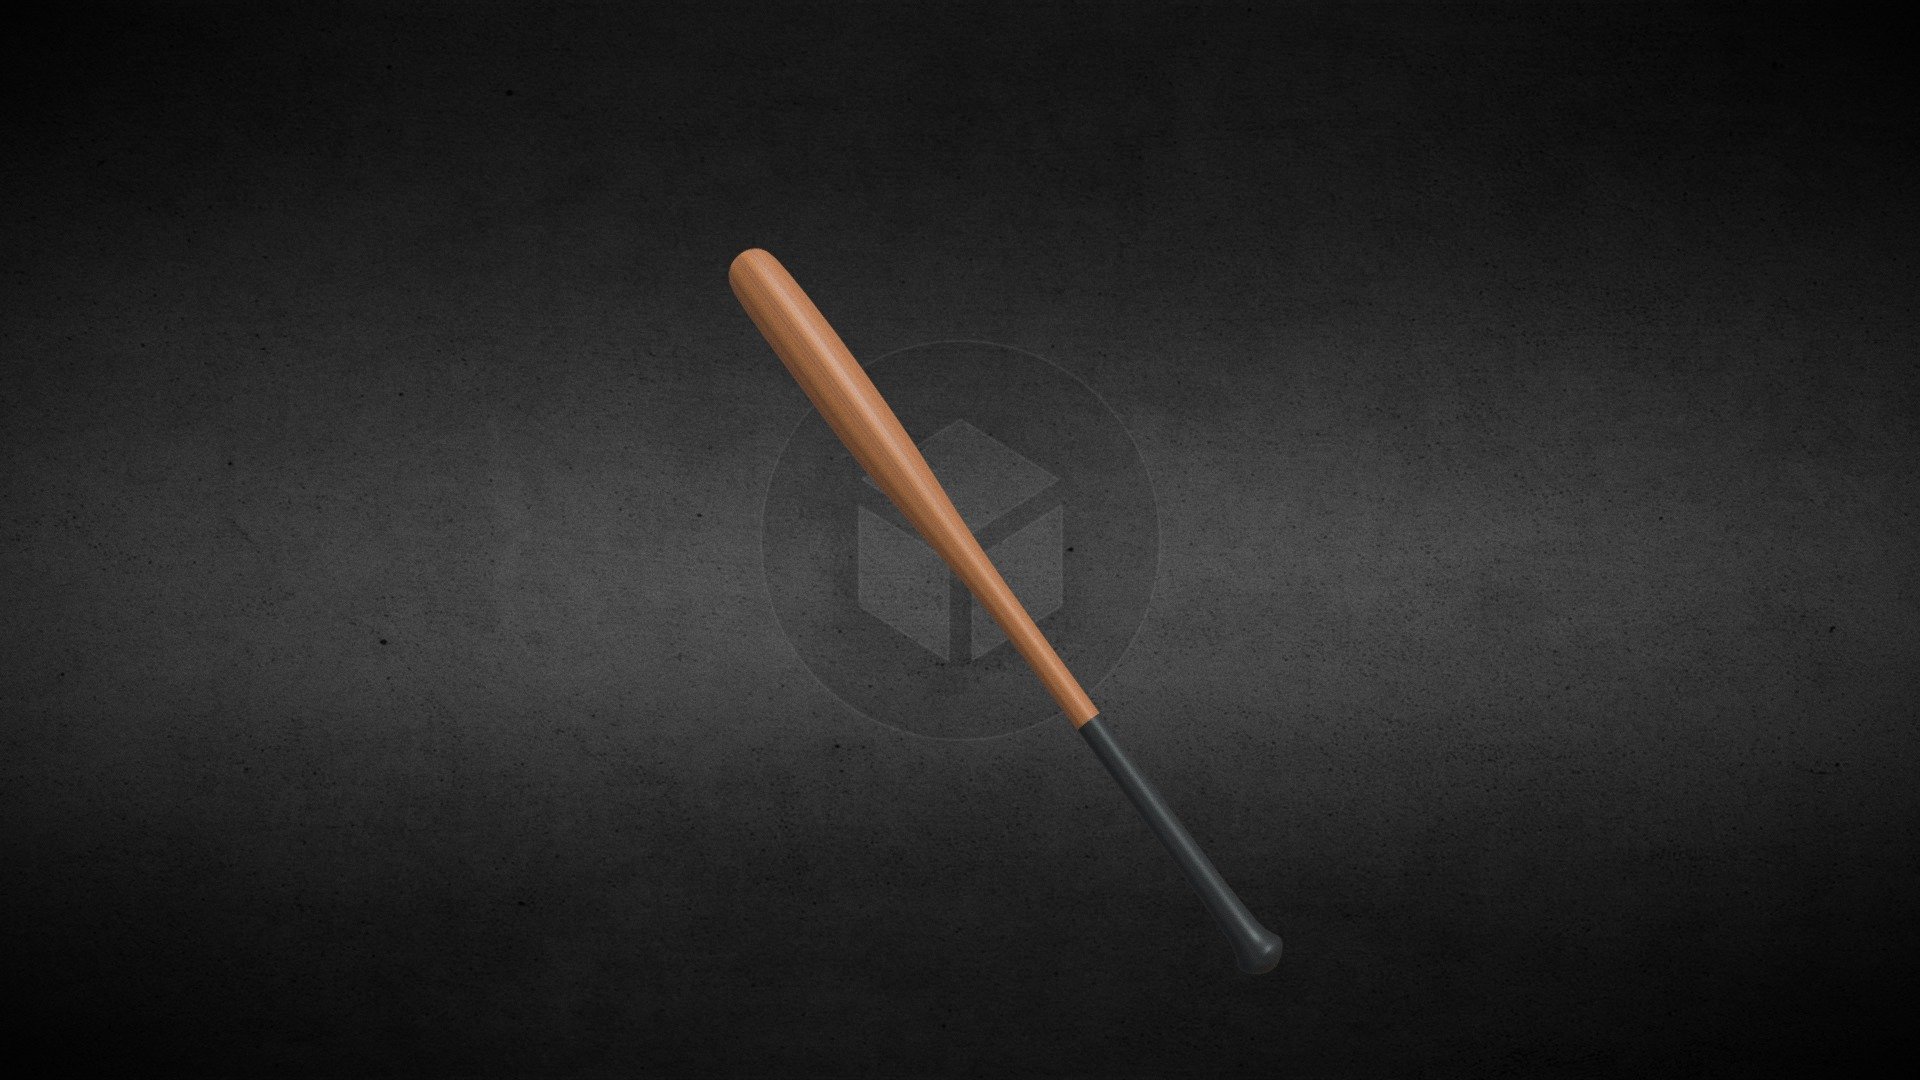 This is baseball bat model for animation and games download and use for free. Unreal engine 4 And unity supported. high poly base ball bat model Free - Baseball Bat (Free) - Download Free 3D model by siddhant (@siddhantm) 3d model